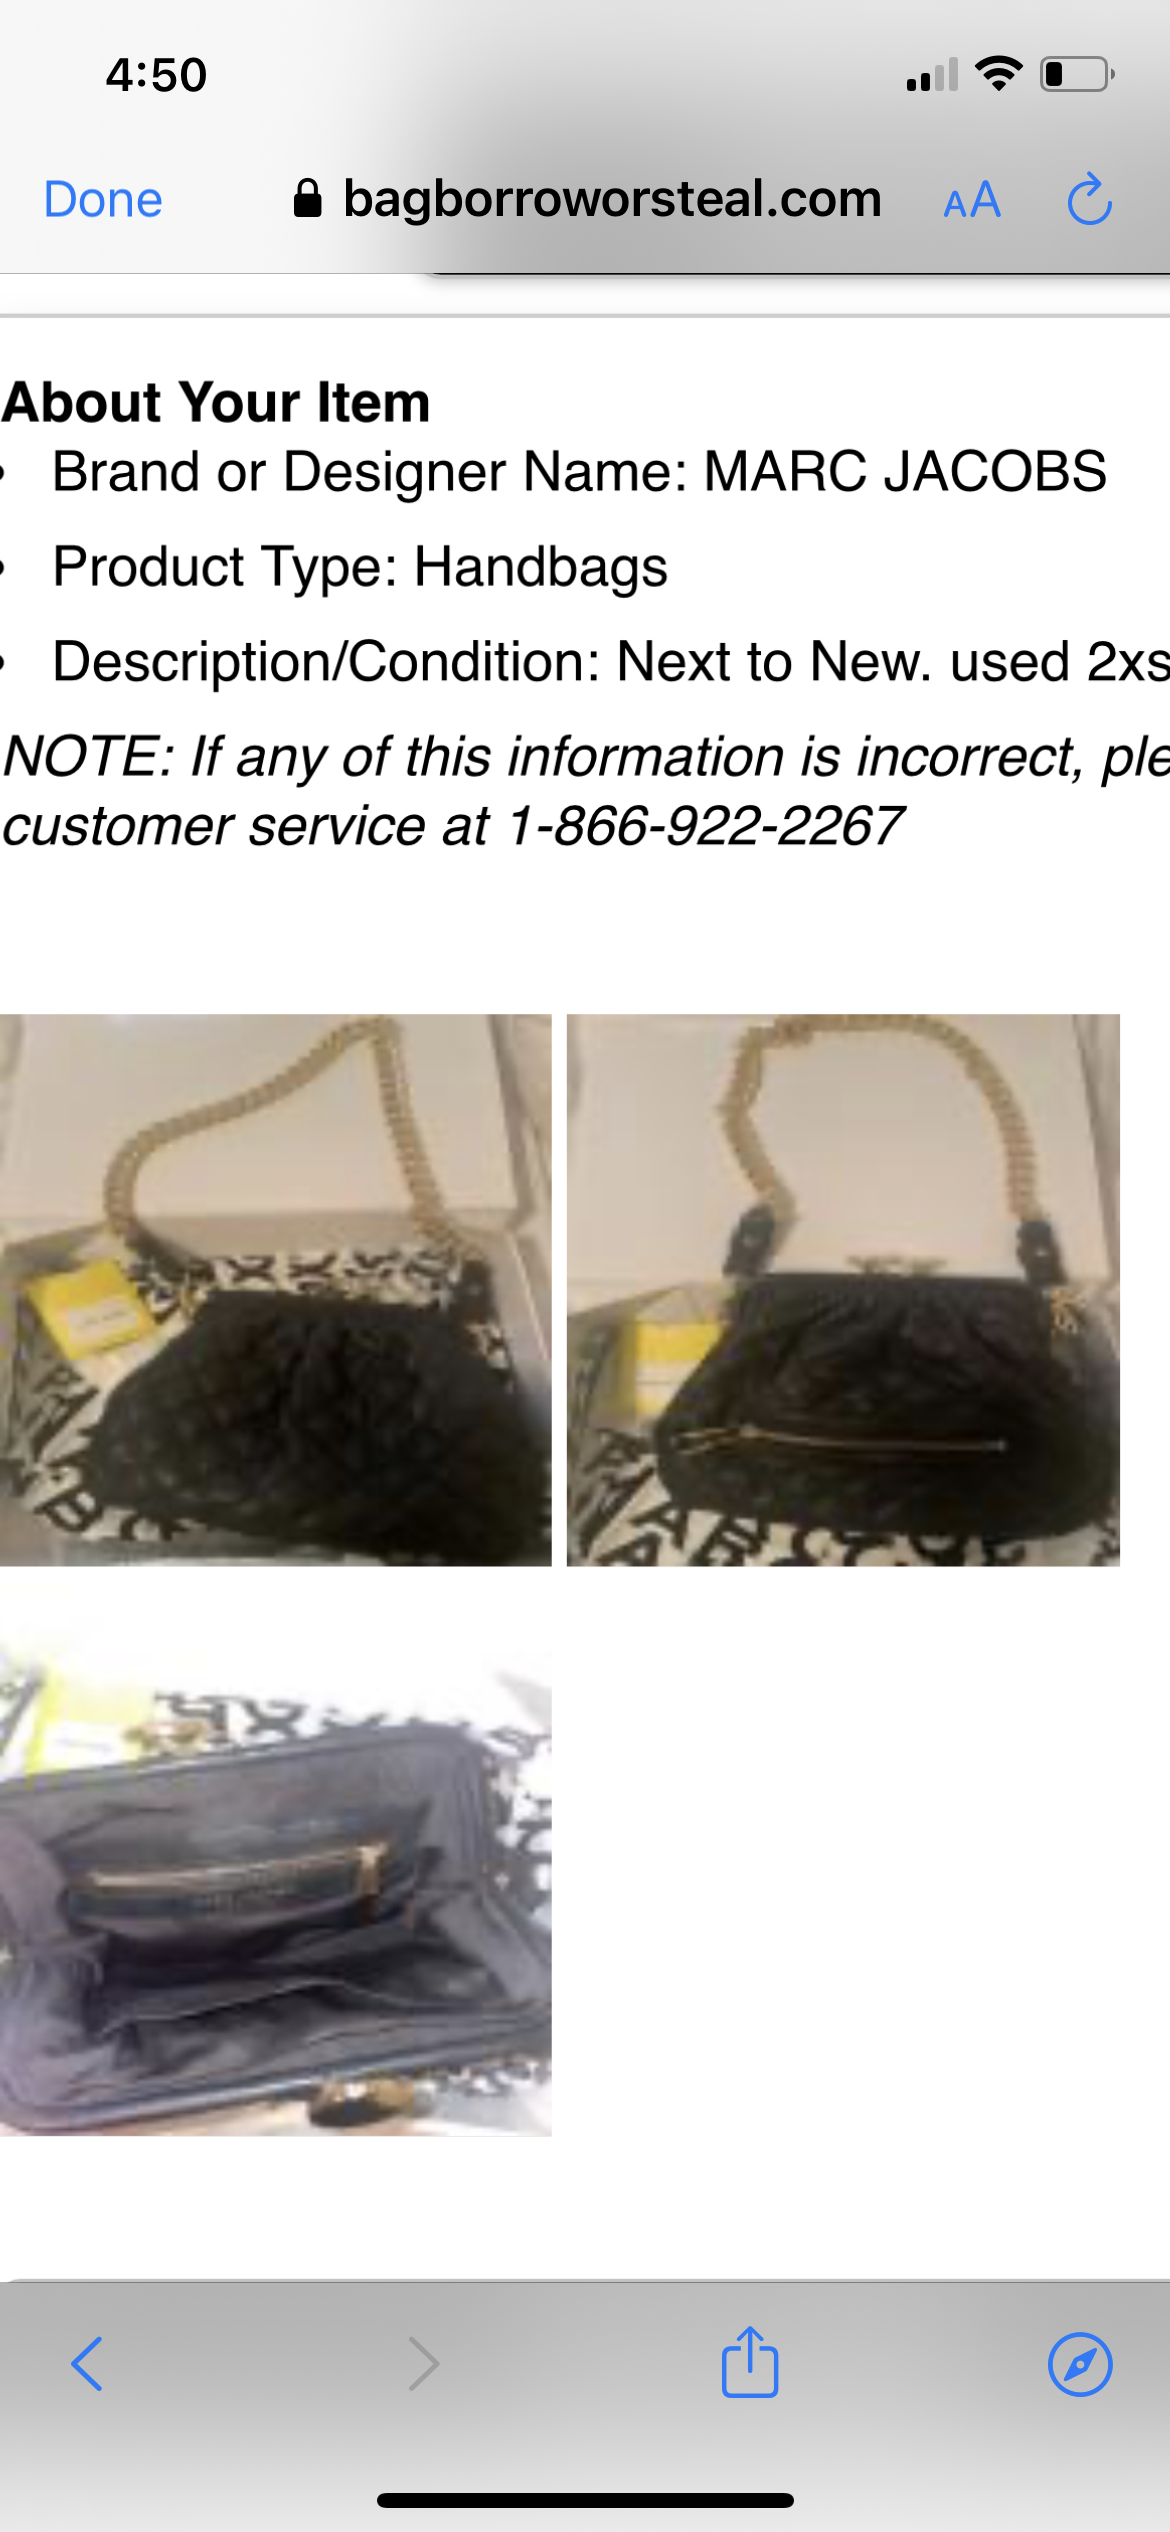 How to spot a fake Louis Vuitton handbag- by the experts at Borro